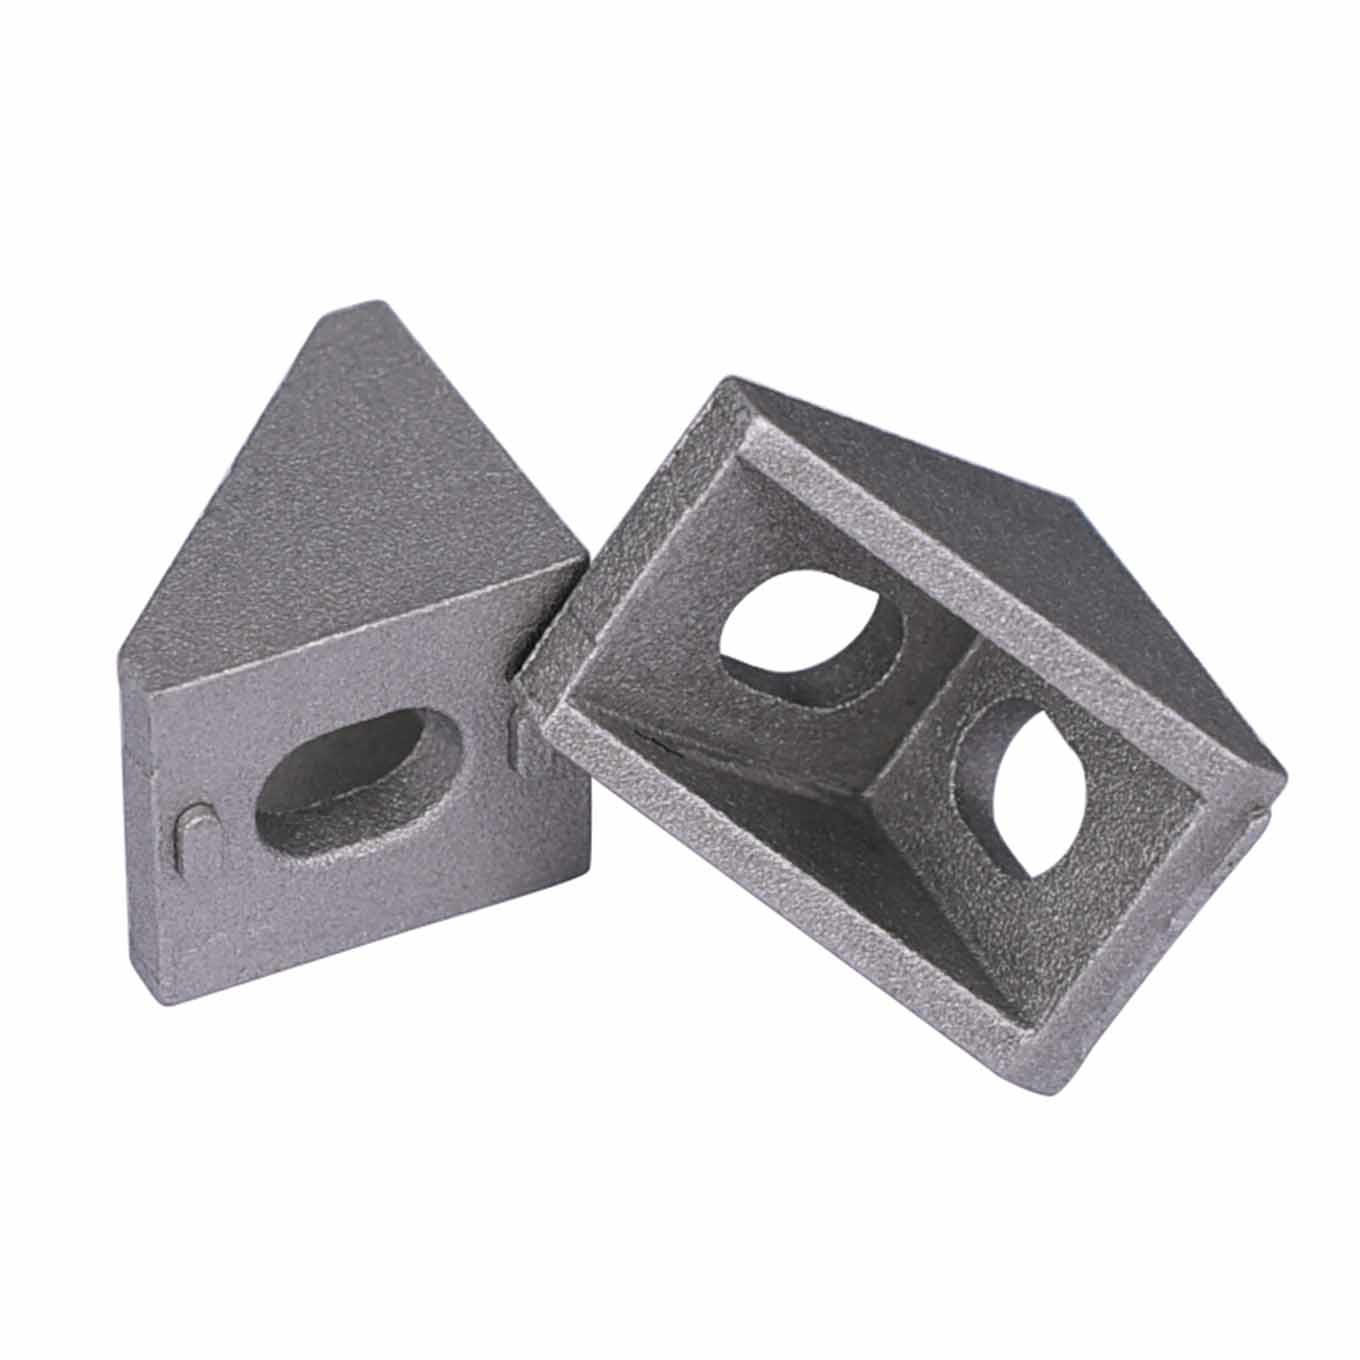 Buy cheap 20*20*17mm 3D Printer Accessories product